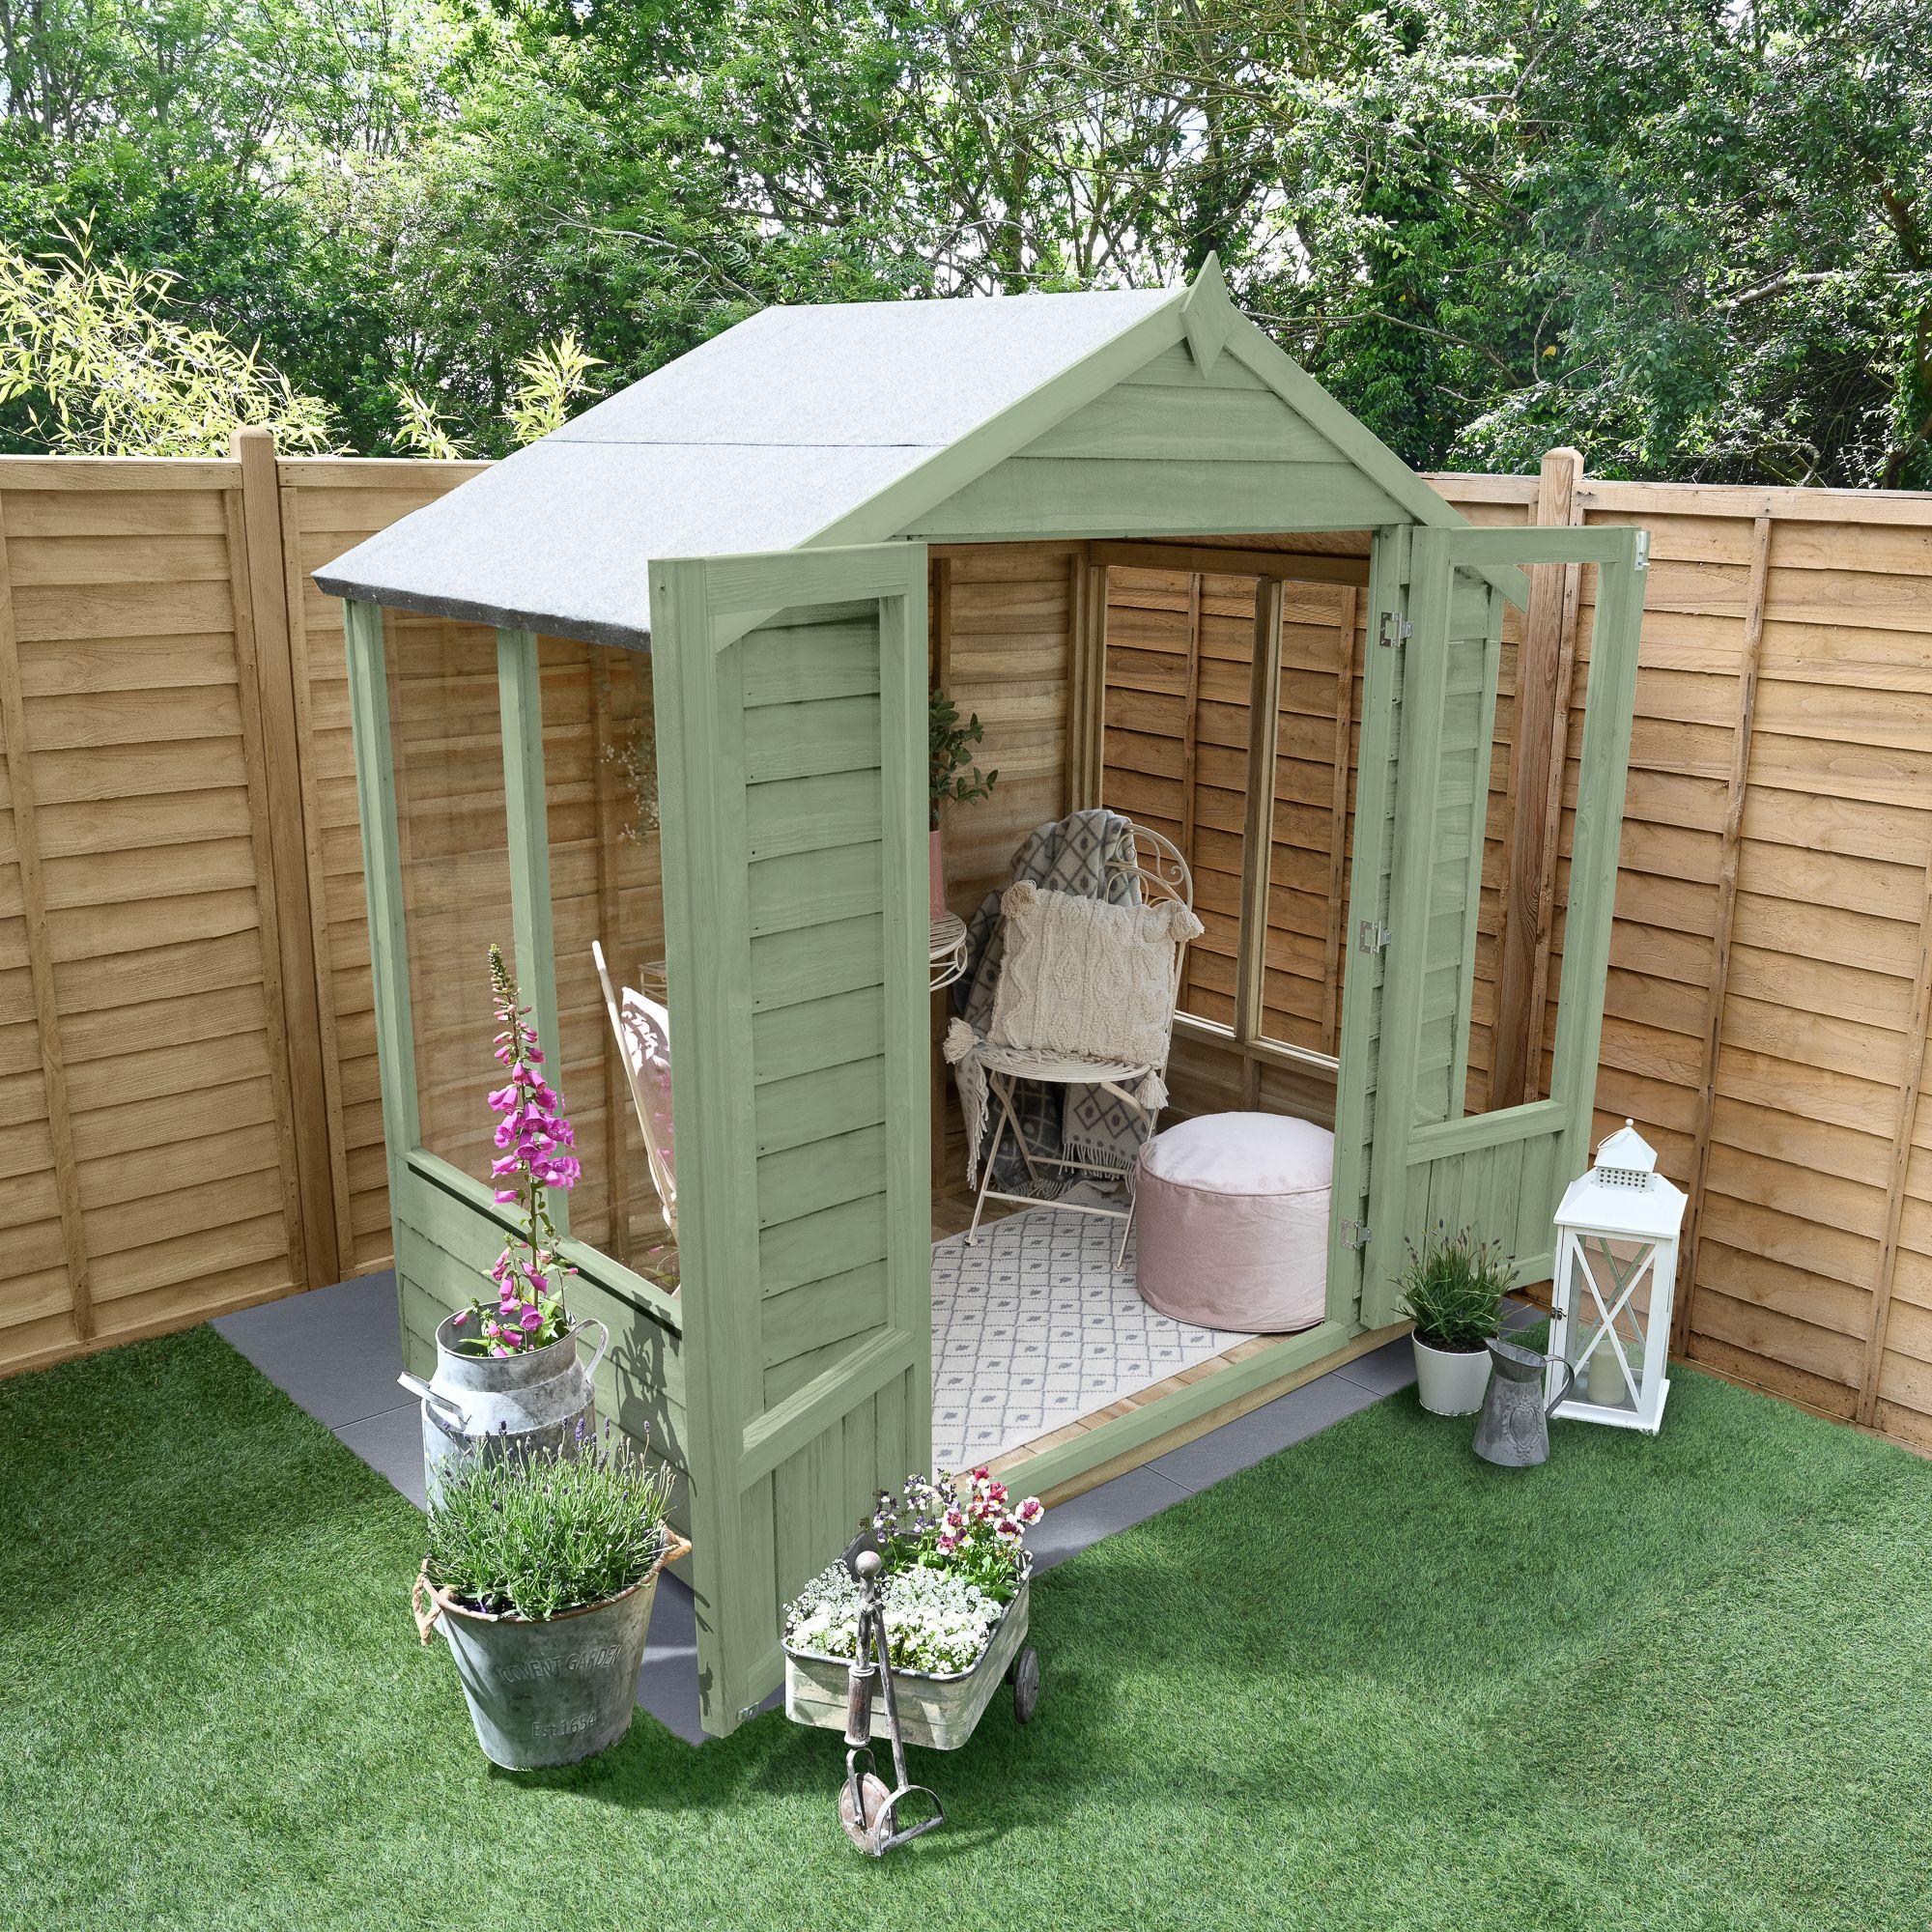 Forest Garden Oakley 6x4 ft with Double door & 4 windows Apex Wooden Summer house (Base included) - Assembly service included